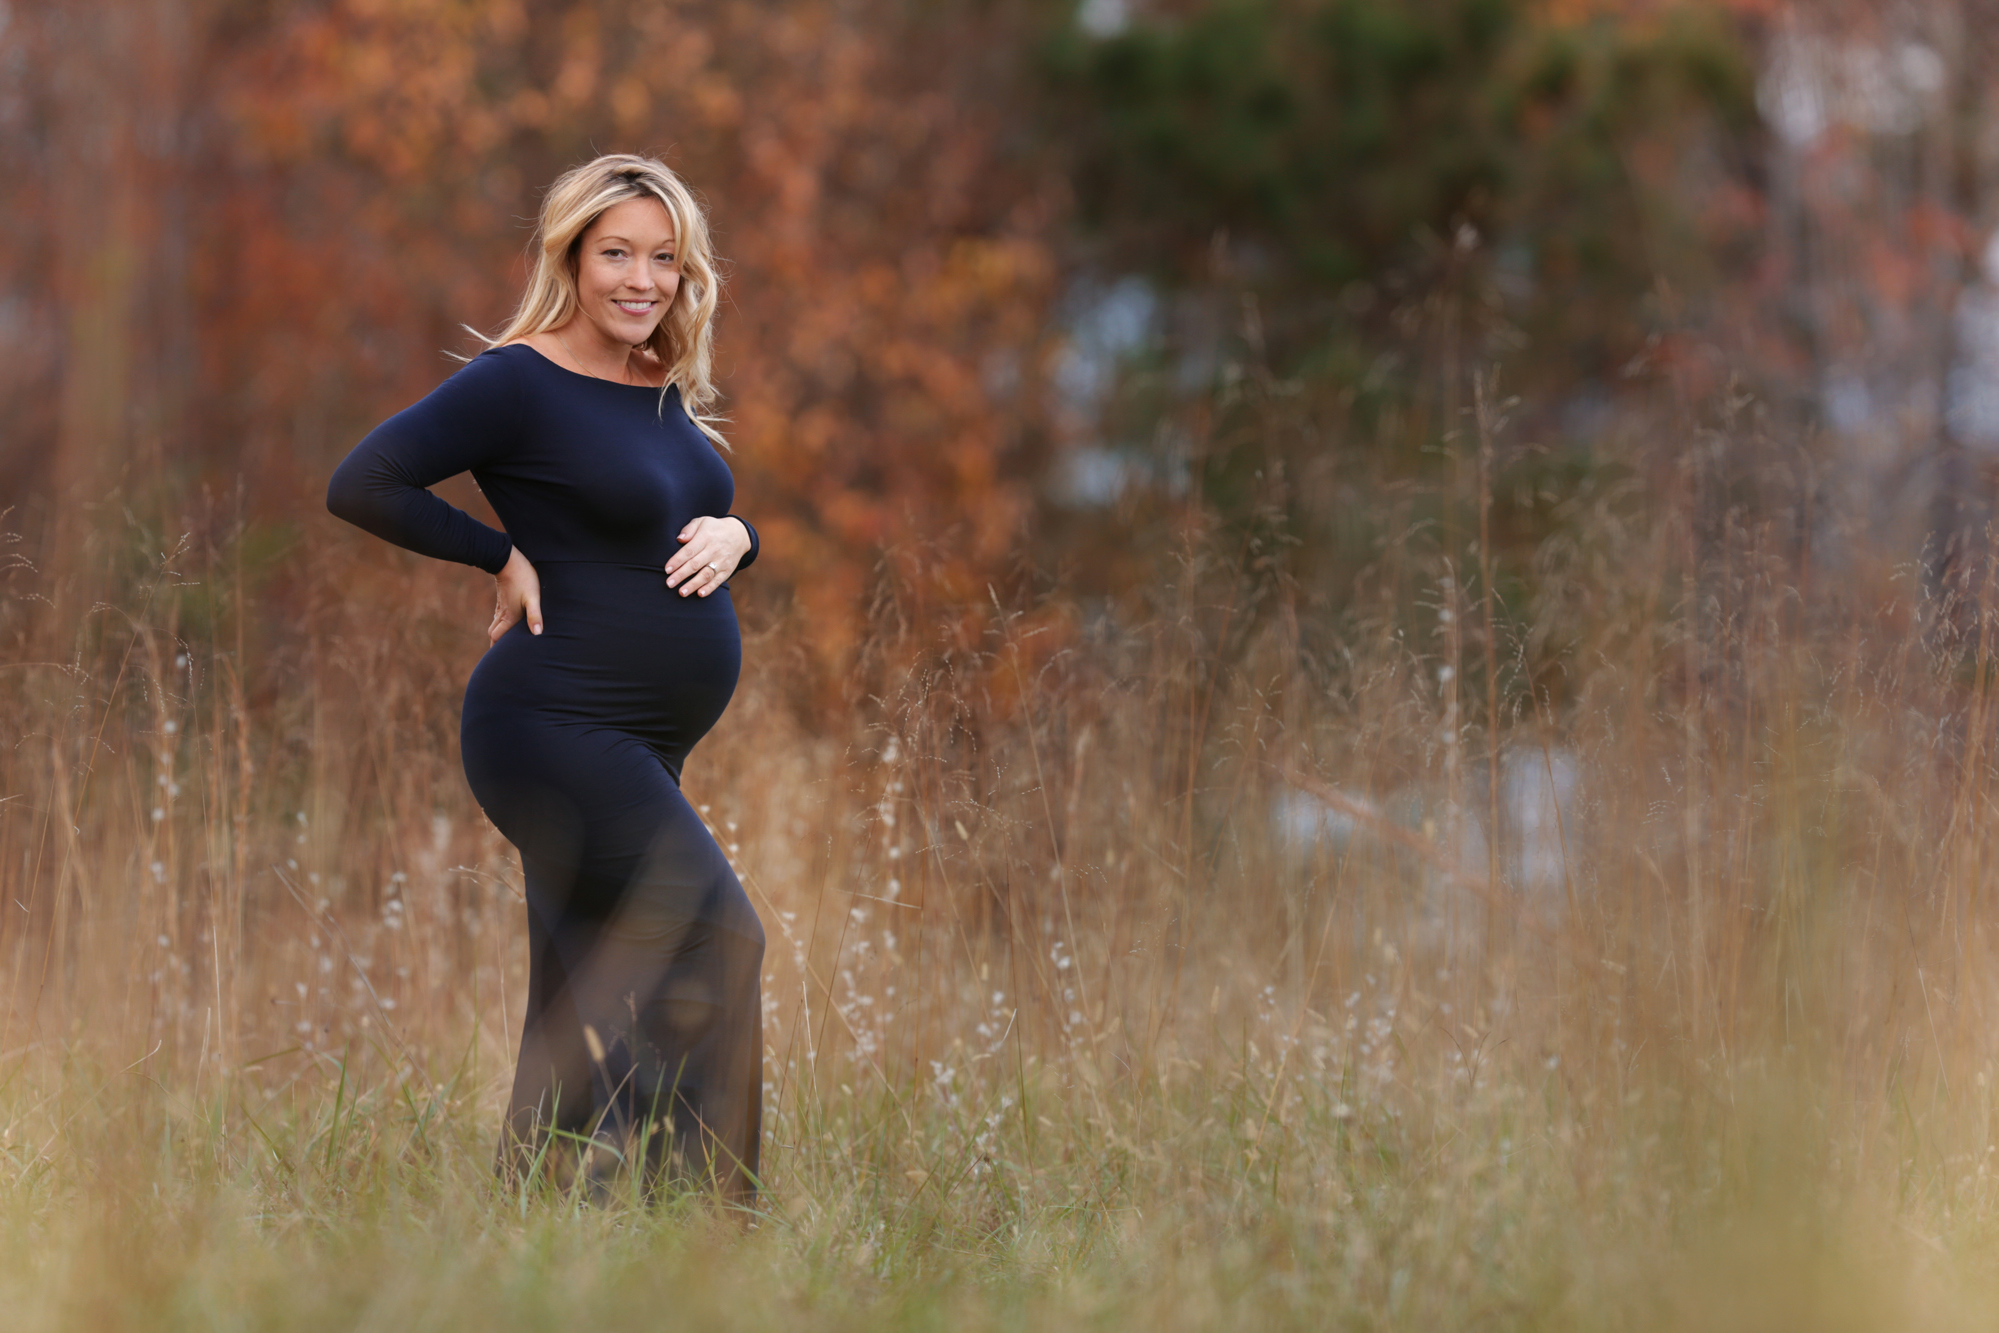 Holly Springs Maternity Photographer - Pregnancy photograph of lady in field